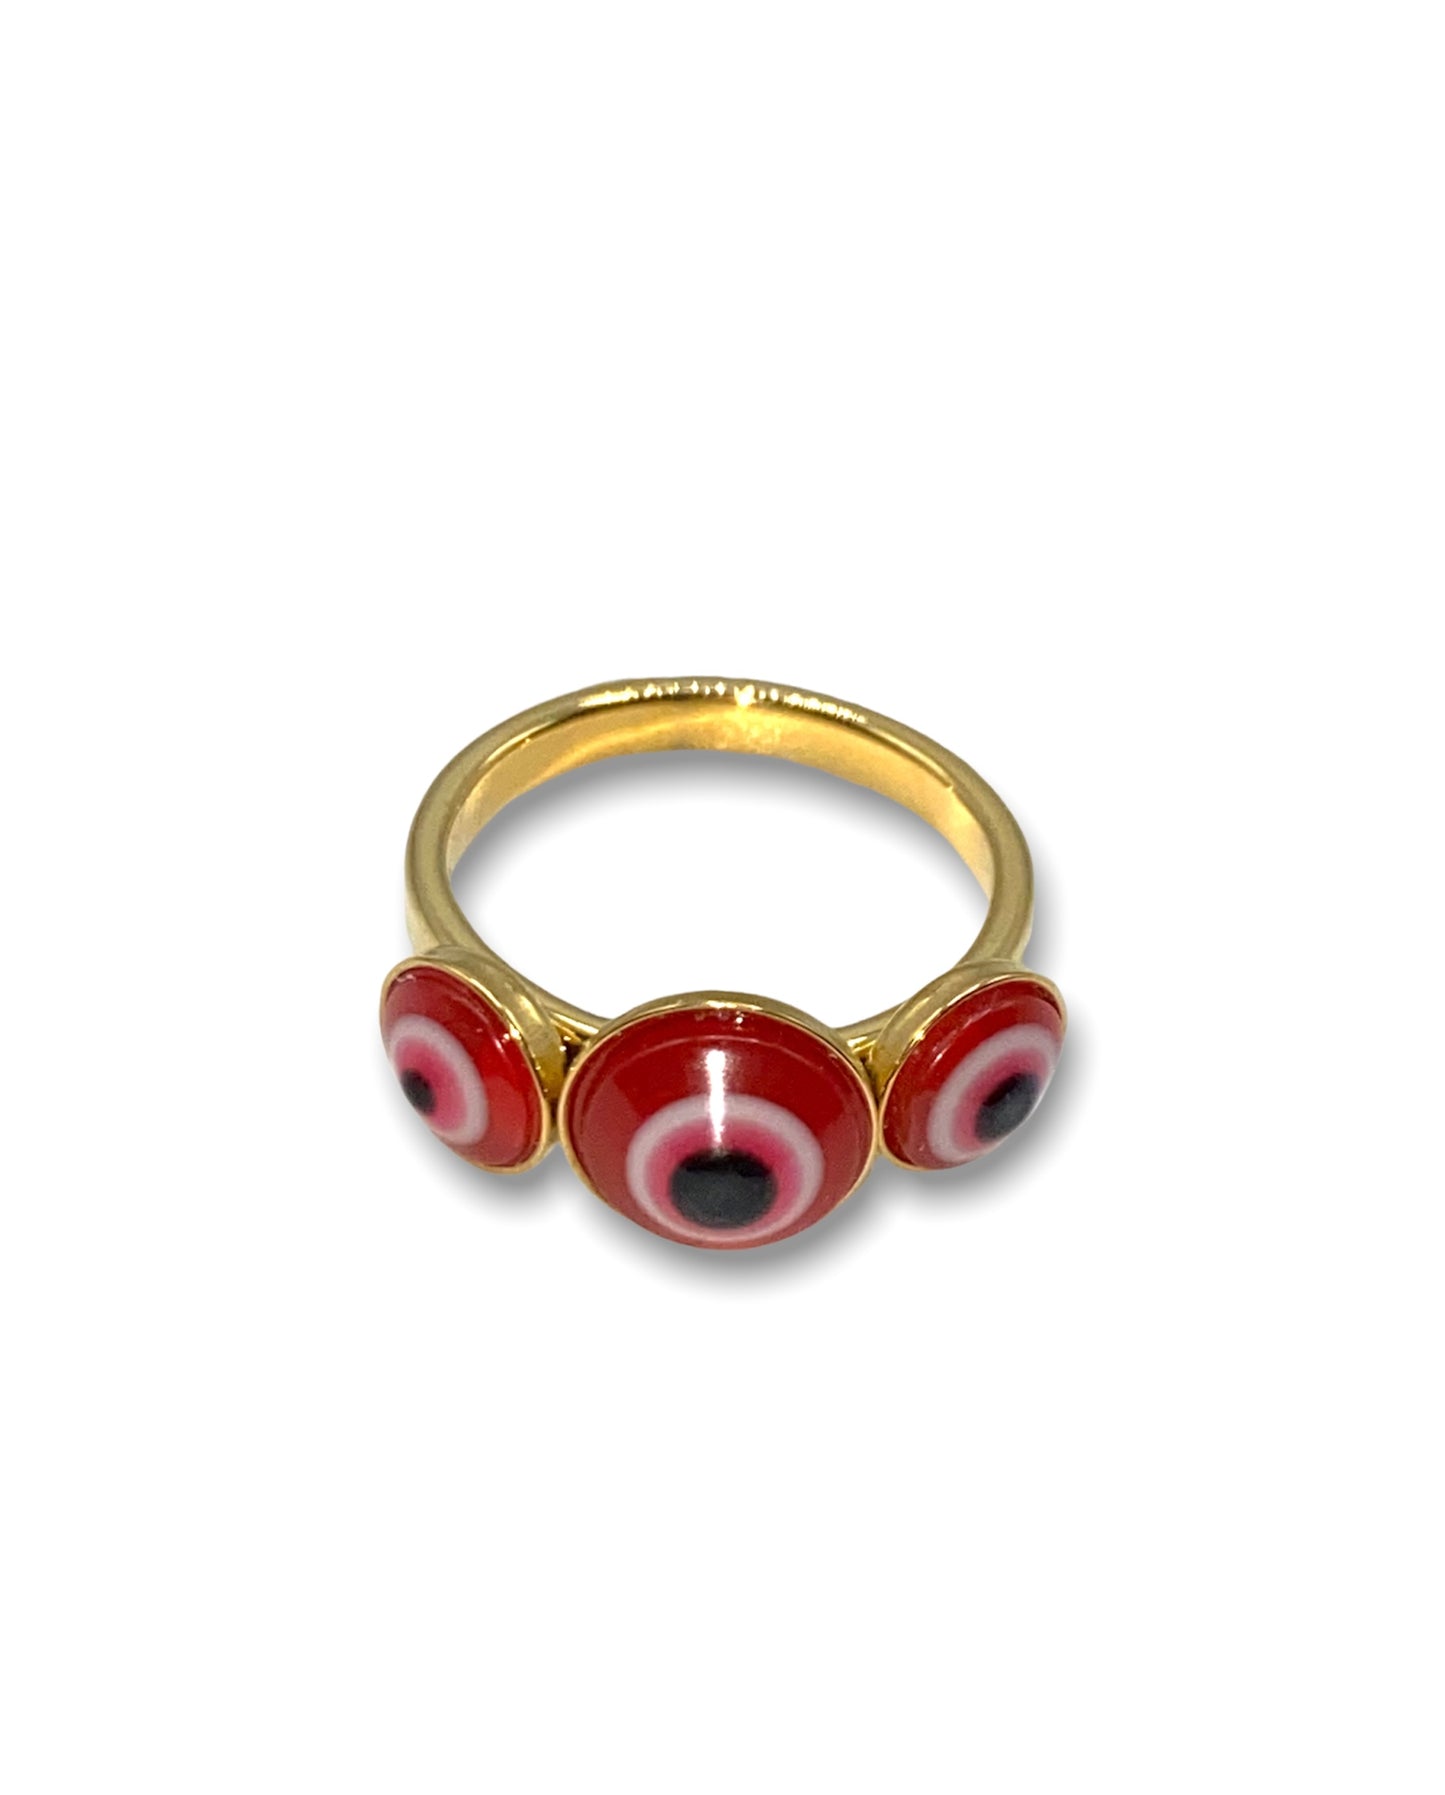 Gold-Filled Ring with 3 Red Evil Eyes | Protection & Style |